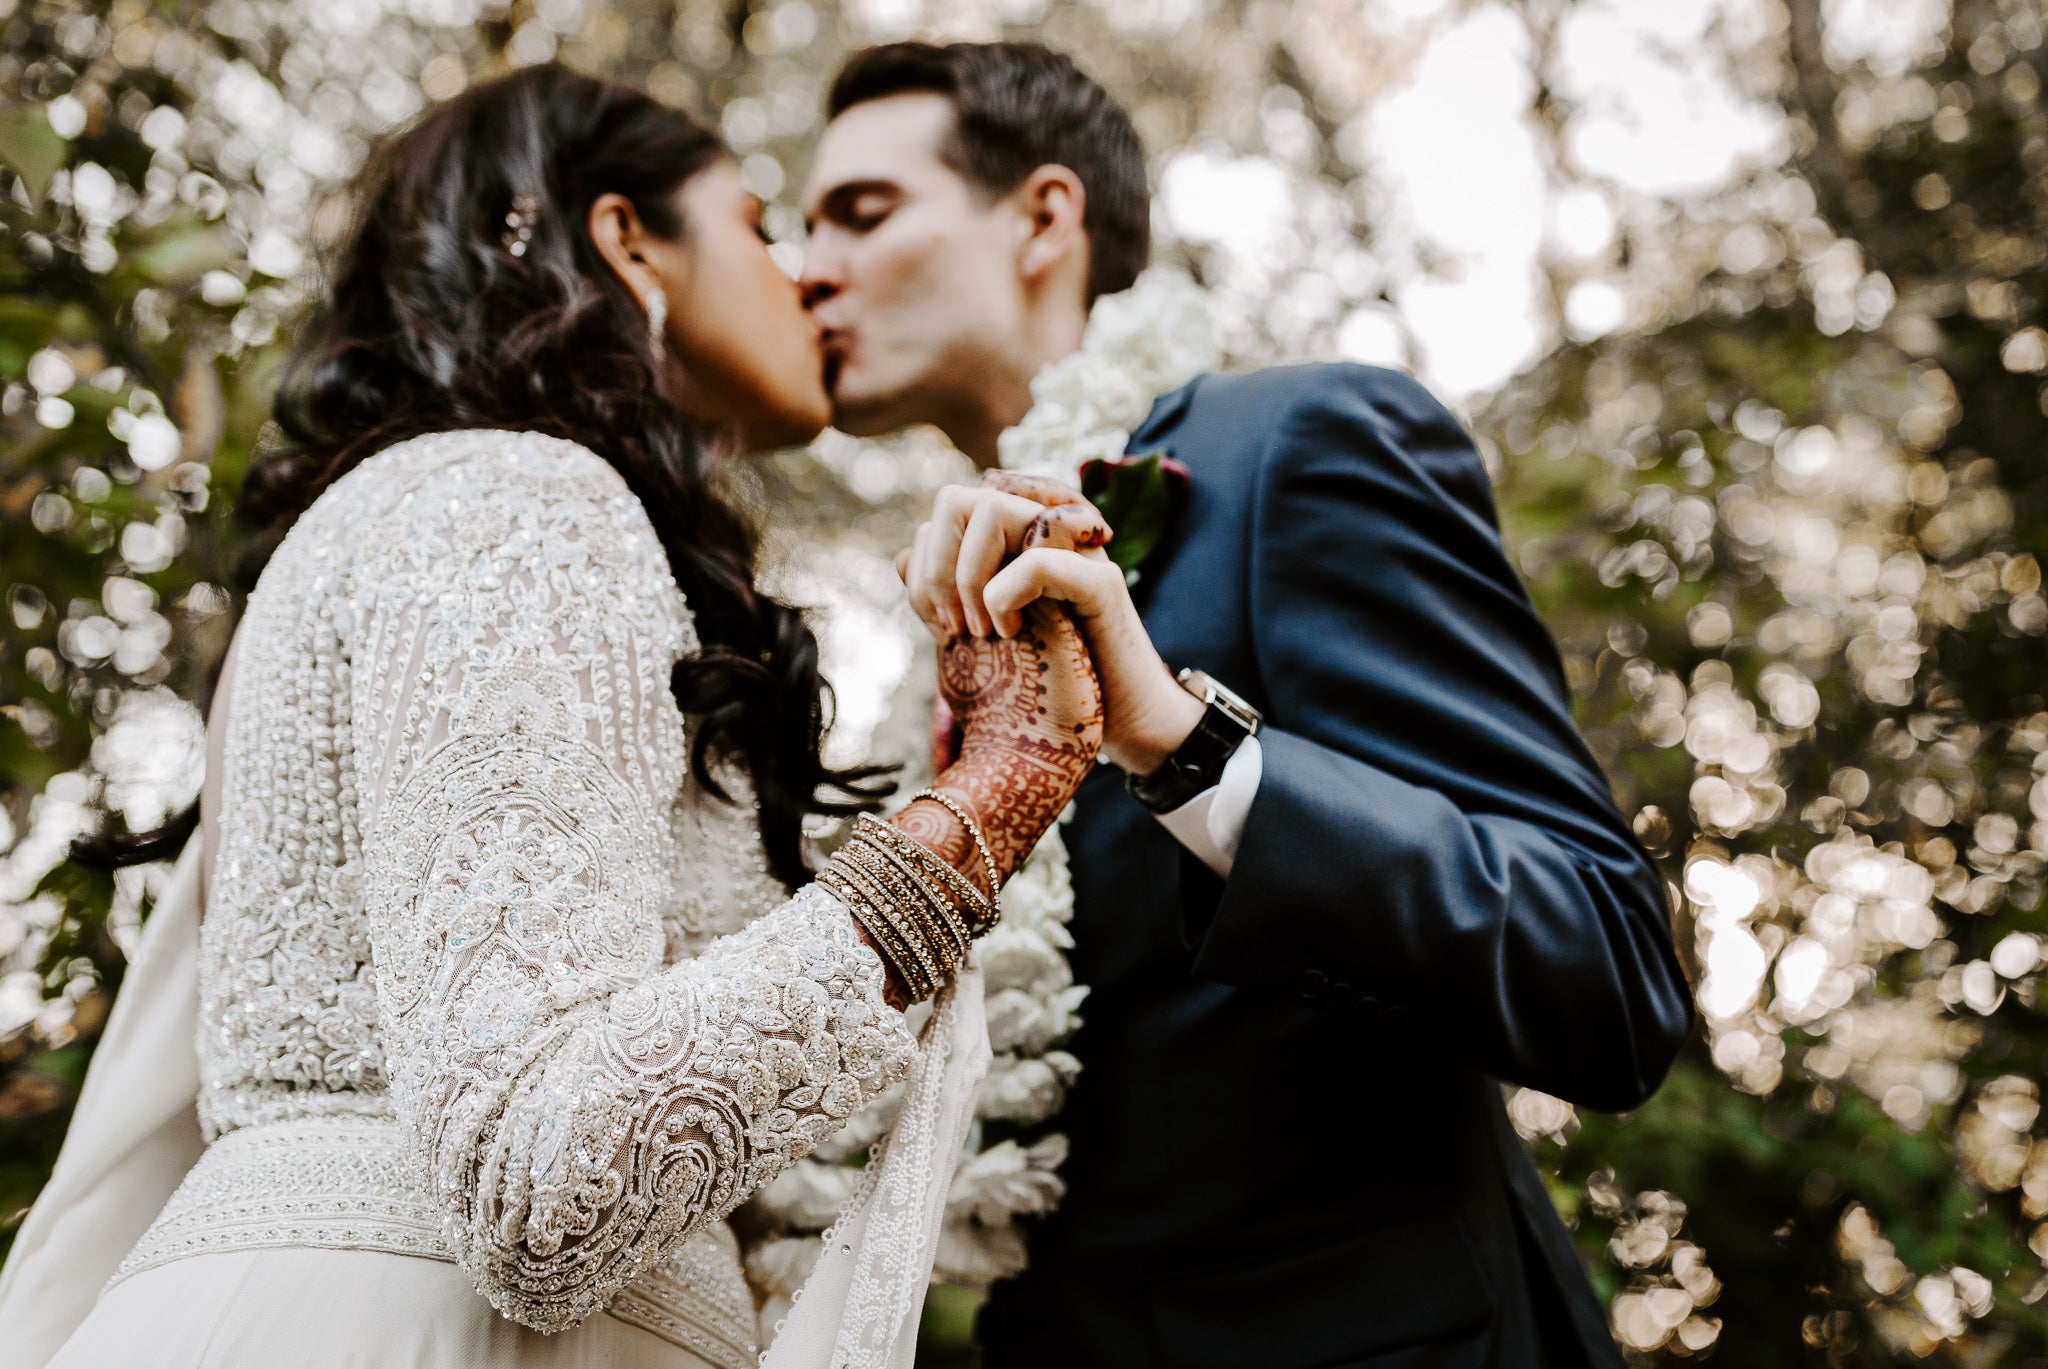 A Ceremony Merging Cultures + Traditions | Featured in The Knot Magazine